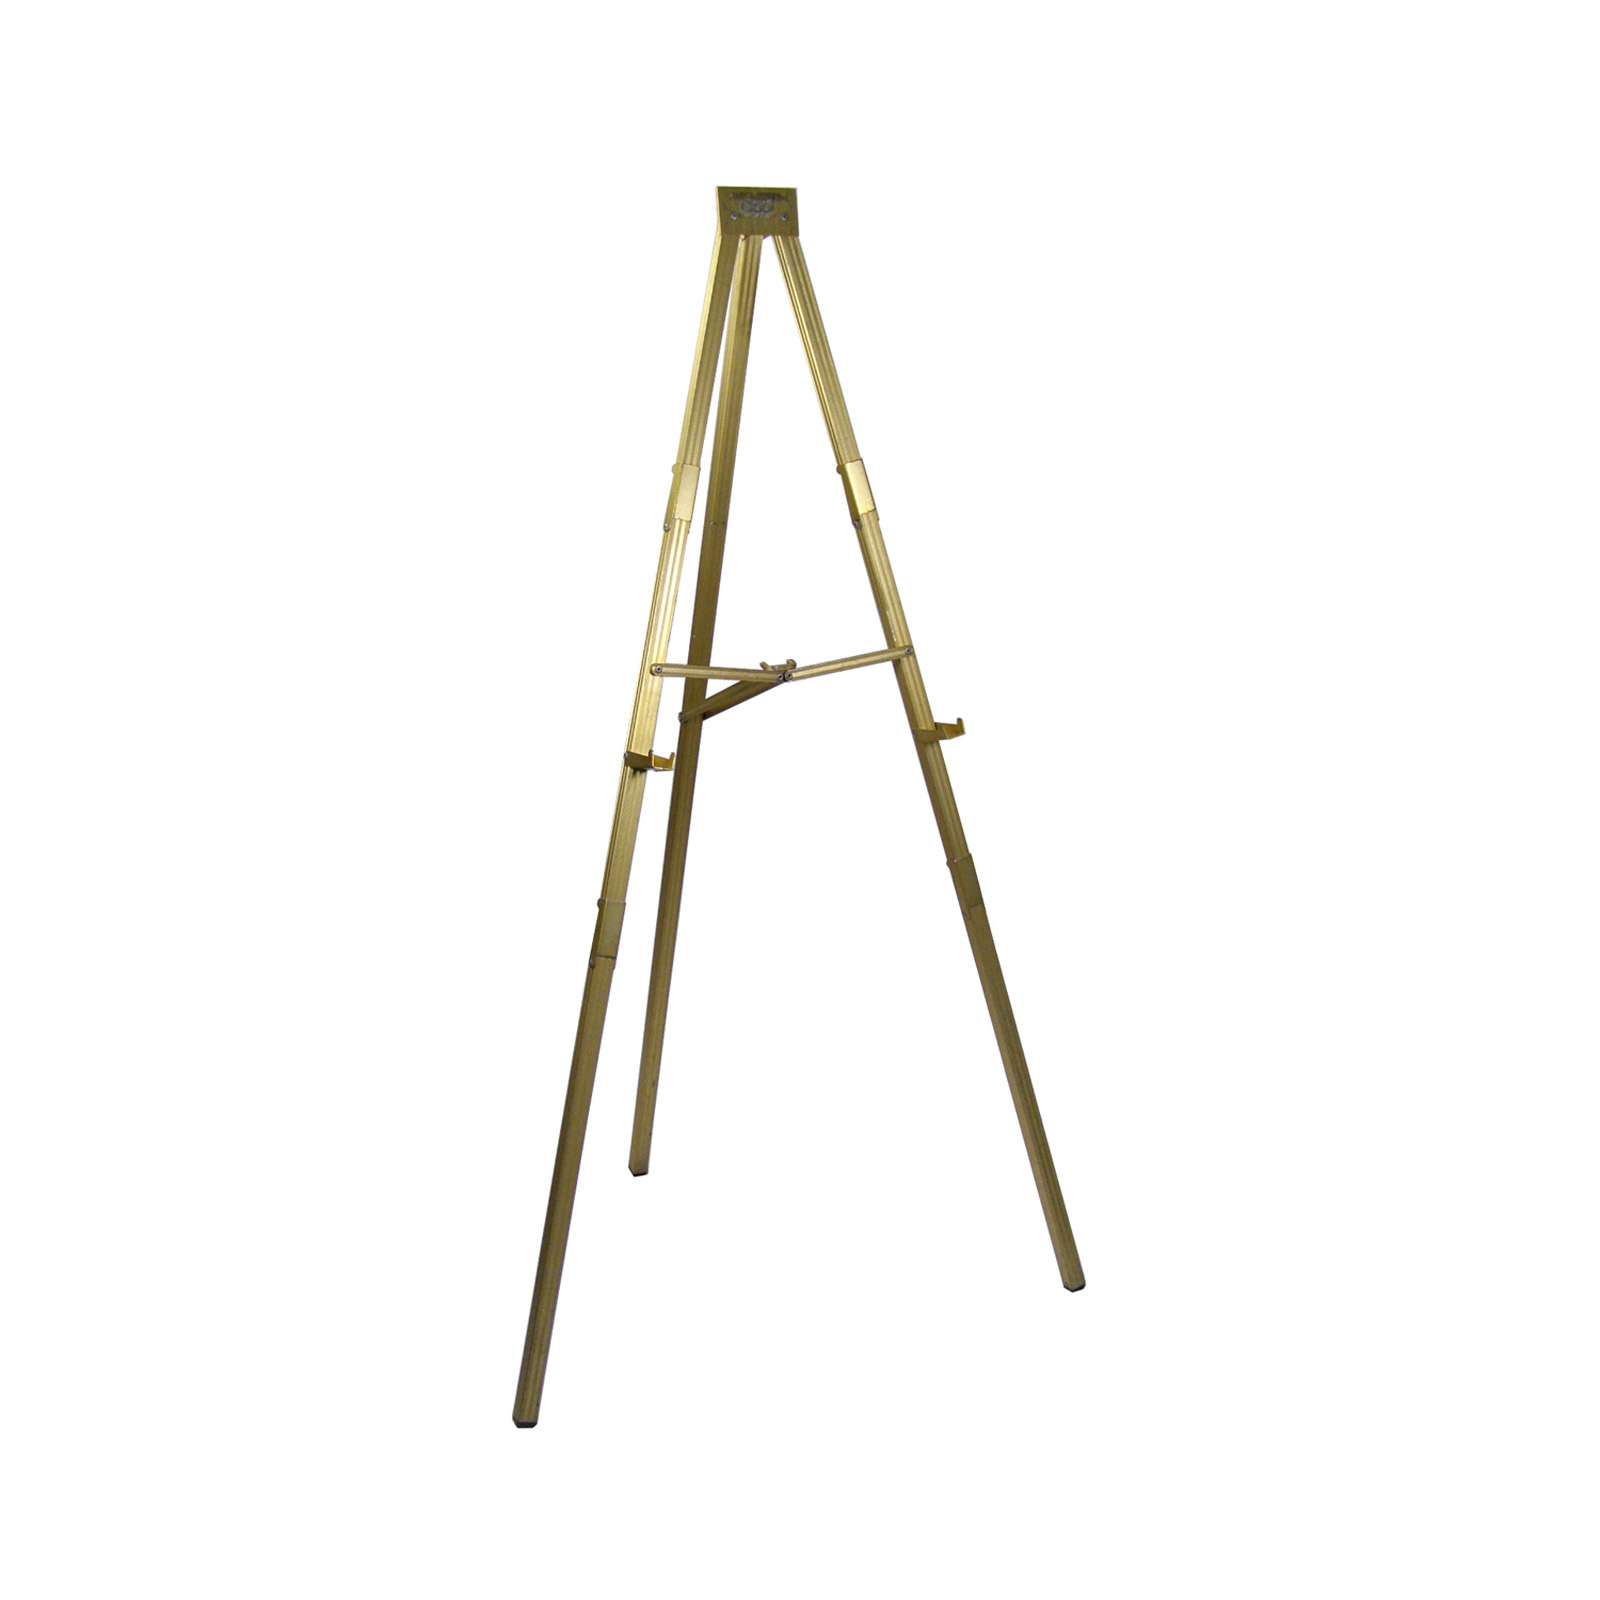 Signs & Easels - All About You Rentals